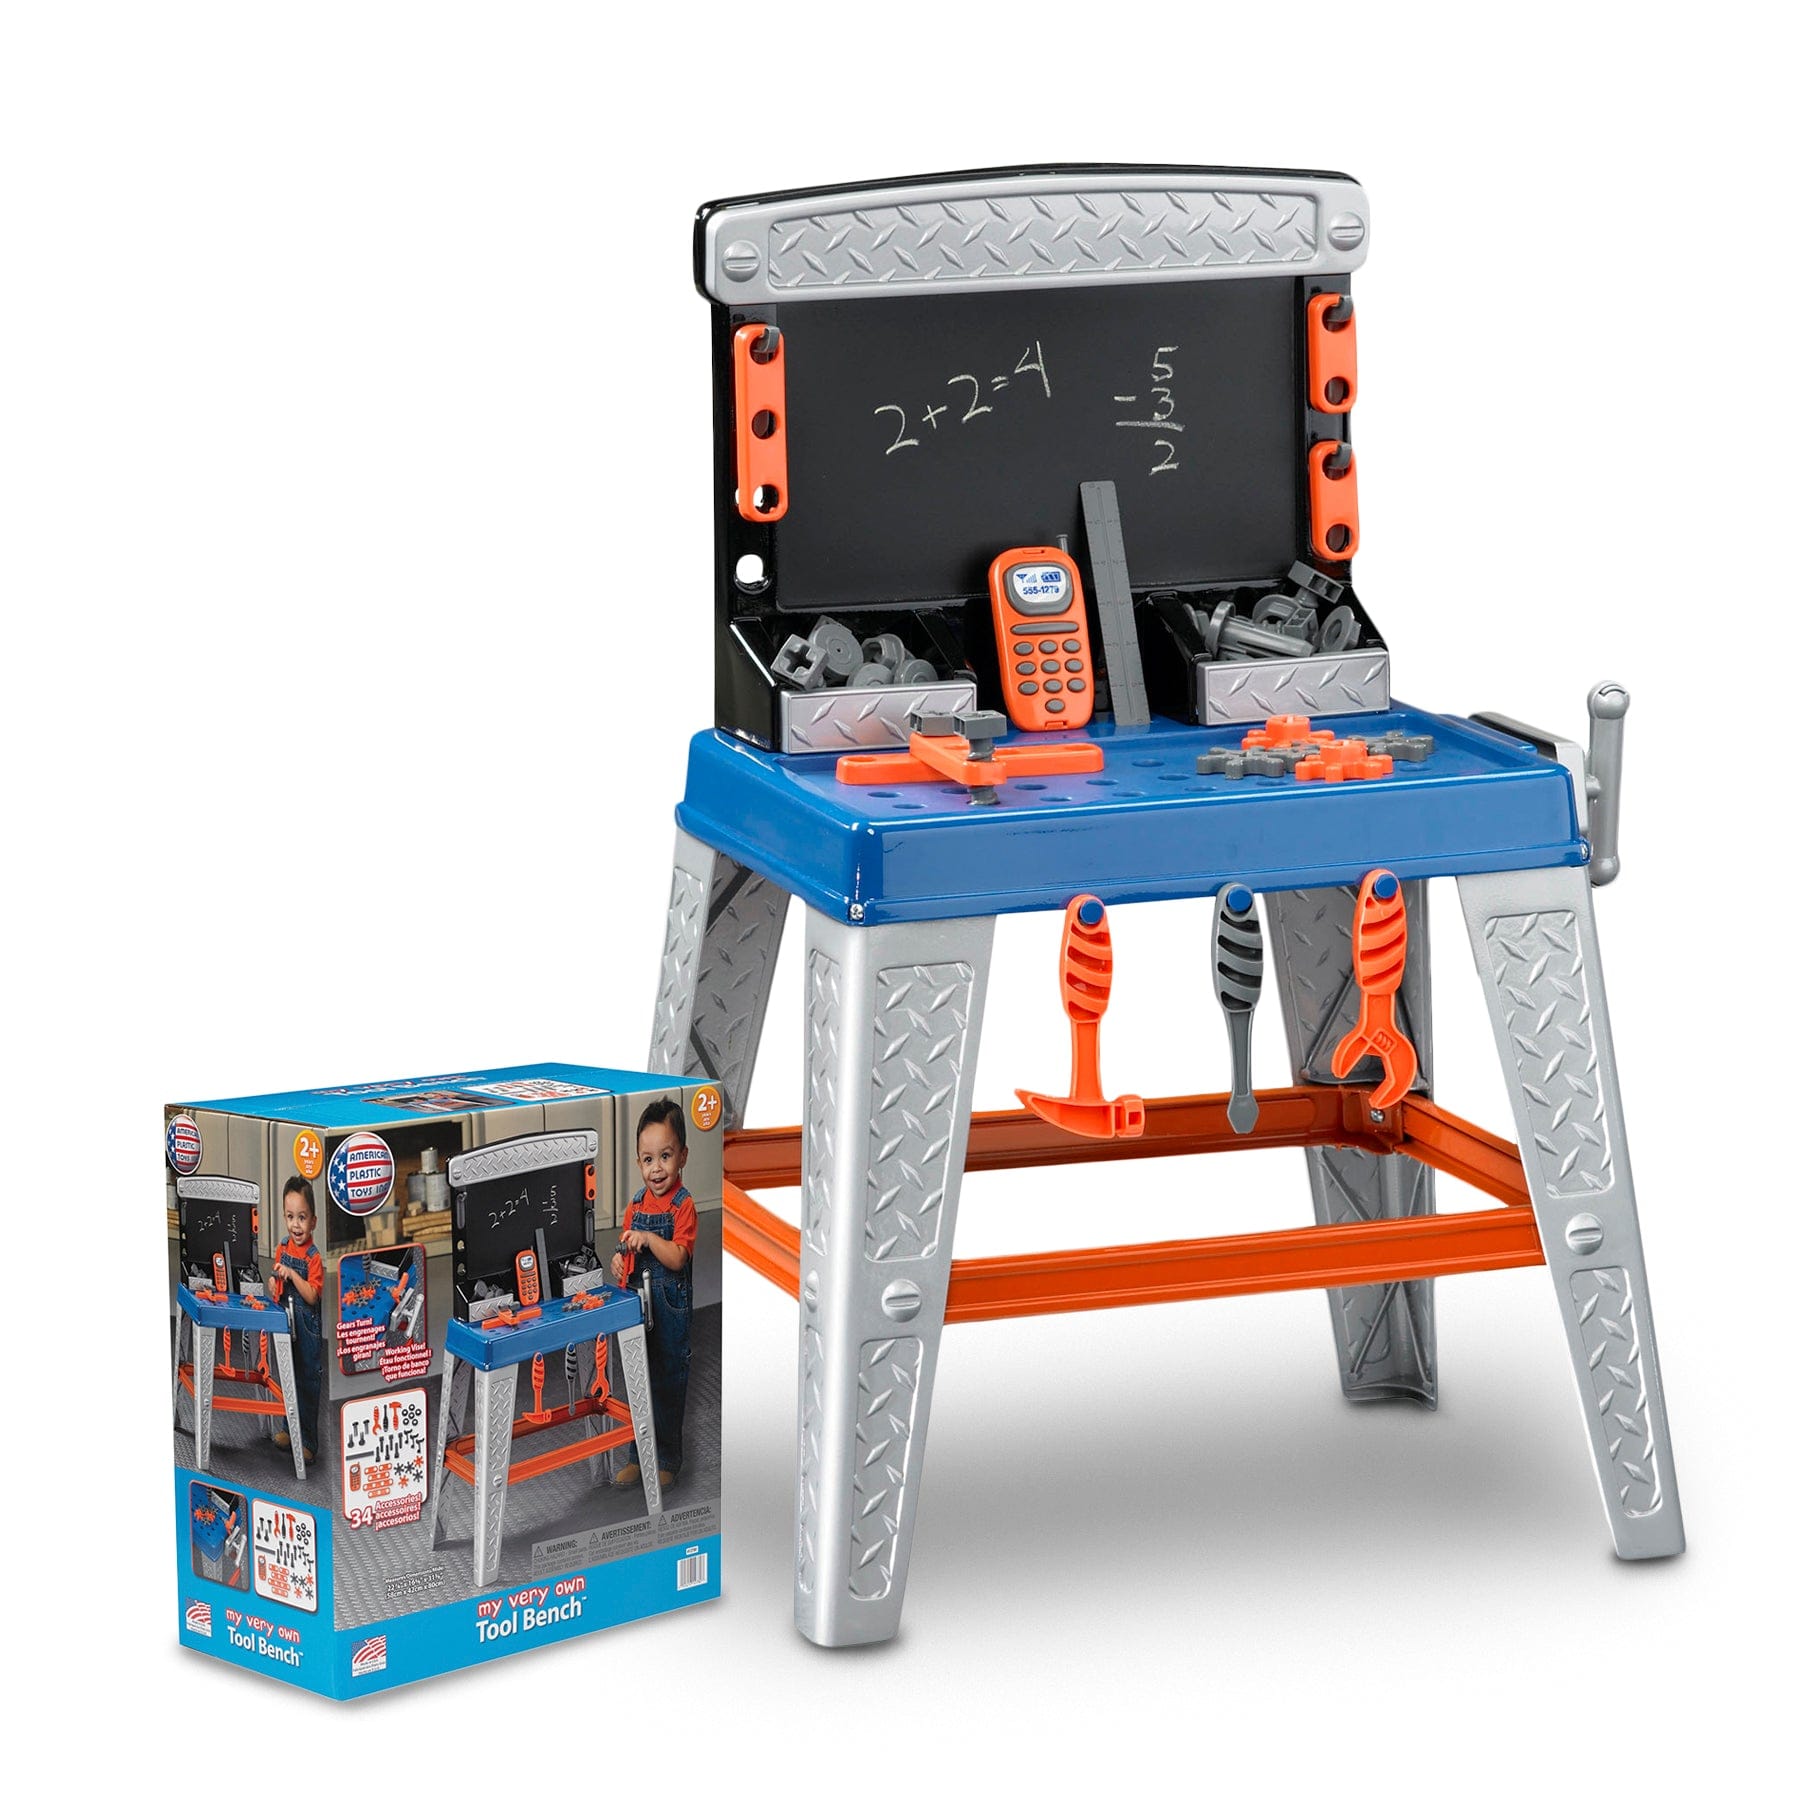 AMERICAN PLASTIC My Very Own Tool Bench: This 35-piece tool bench has everything a little handy man needs - 12780